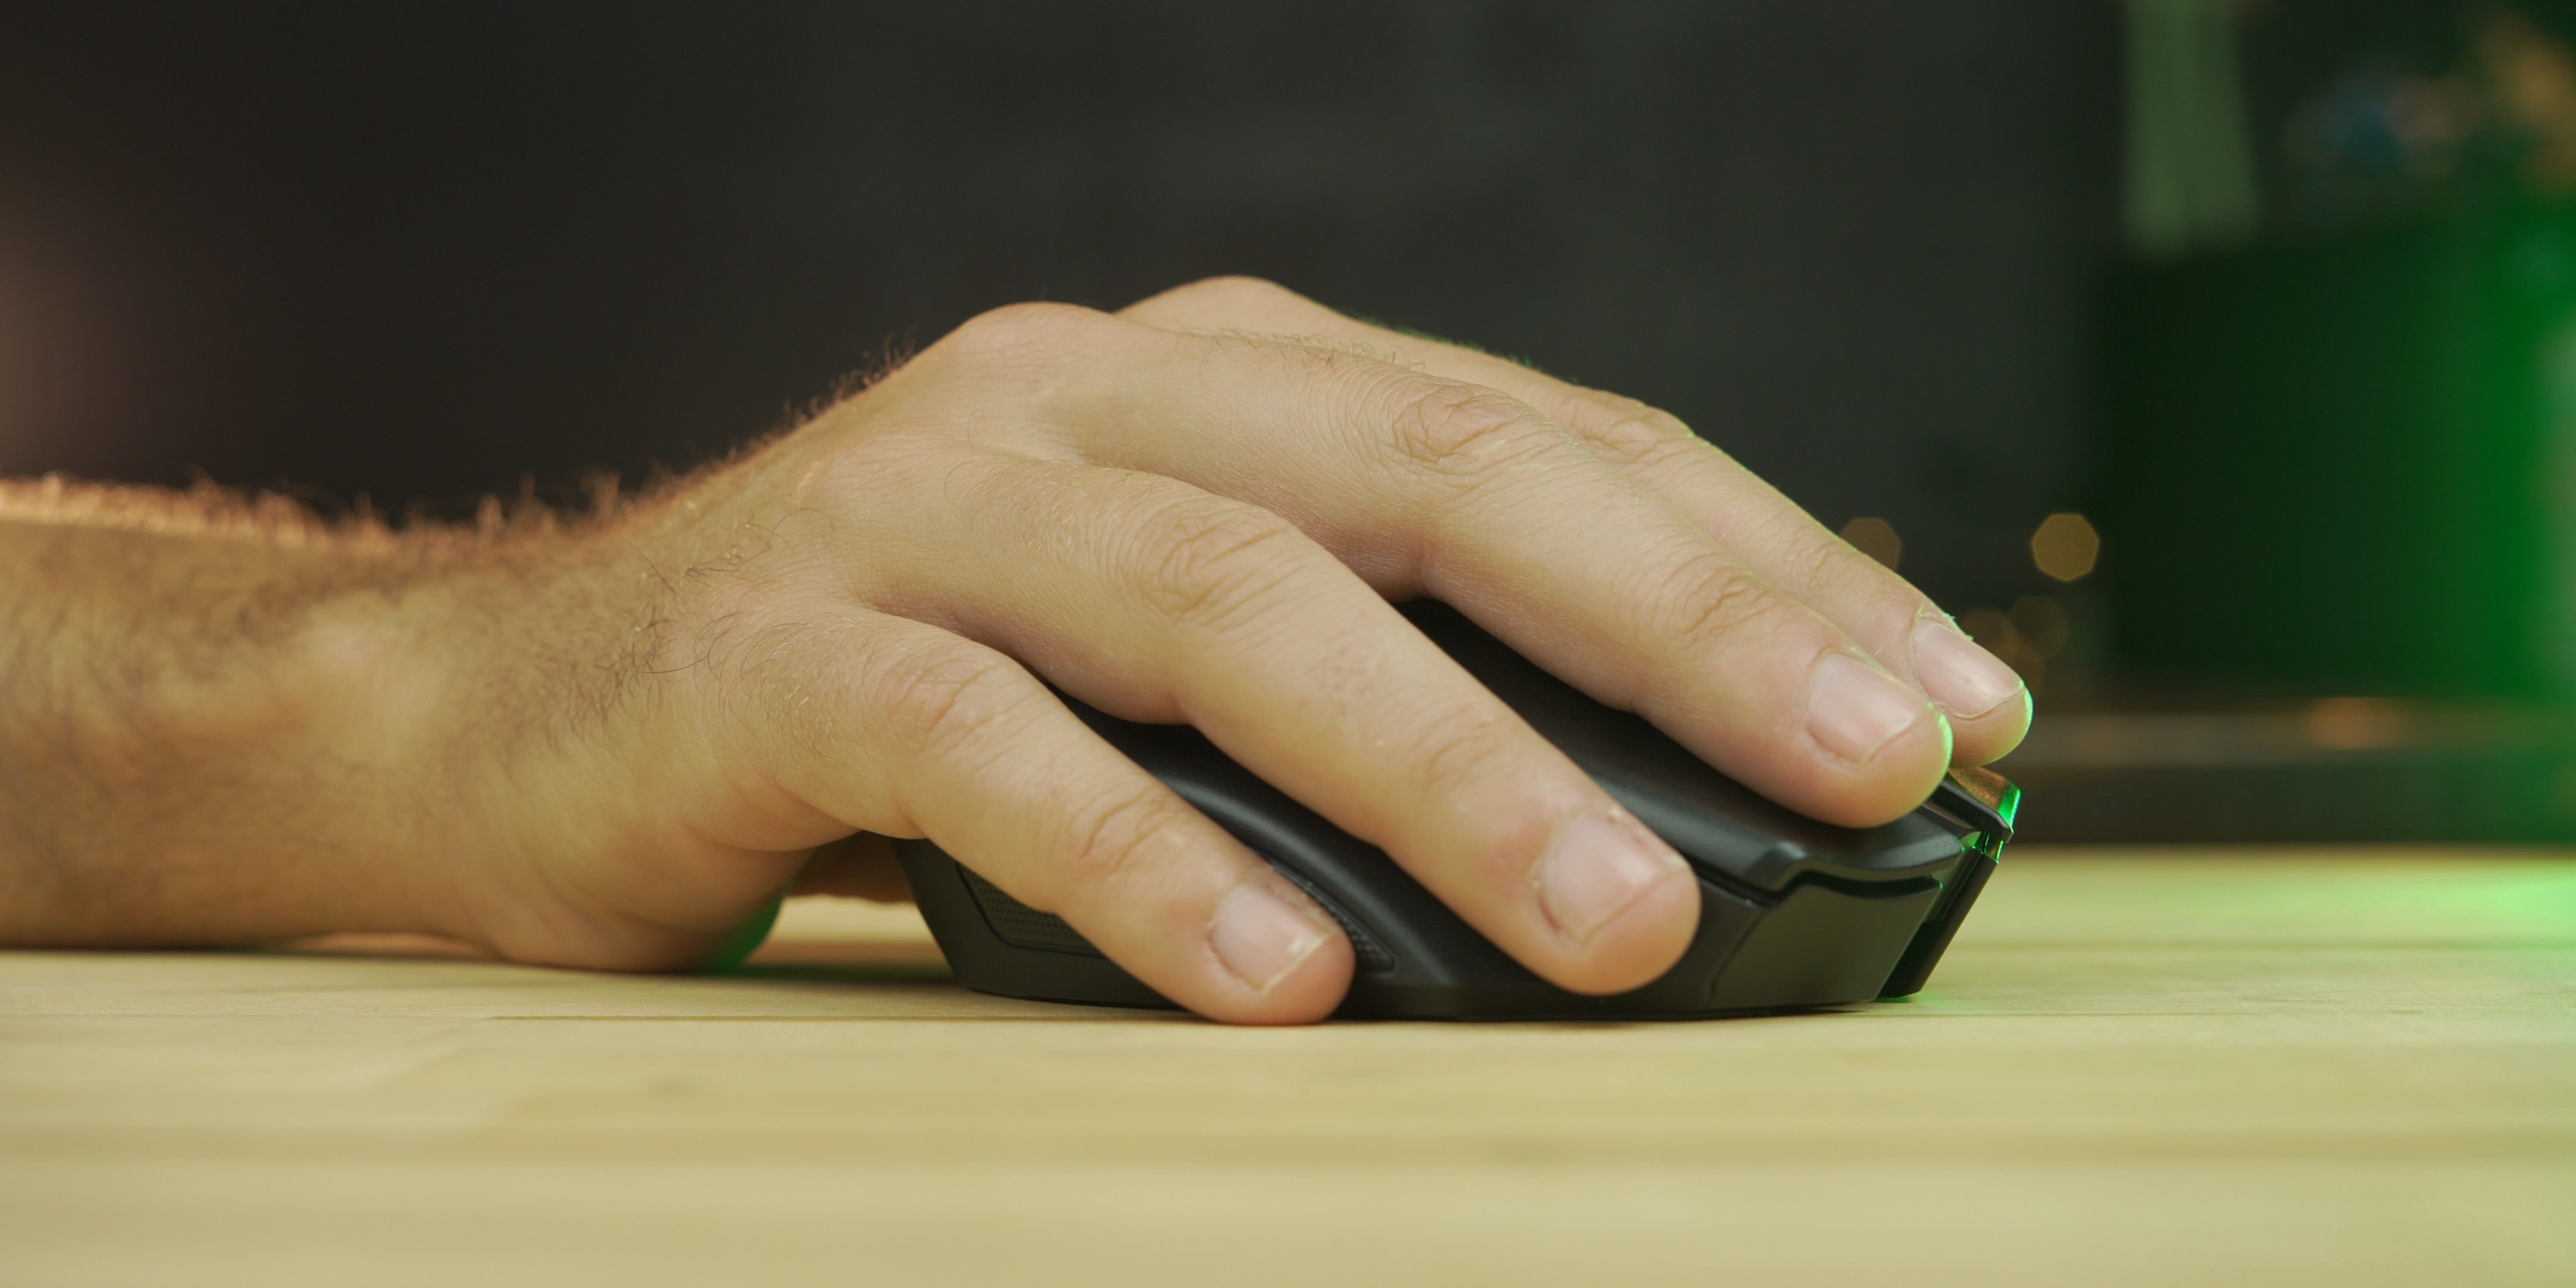 Razer Naga Pro Review: Wireless with up to 20 customizable buttons